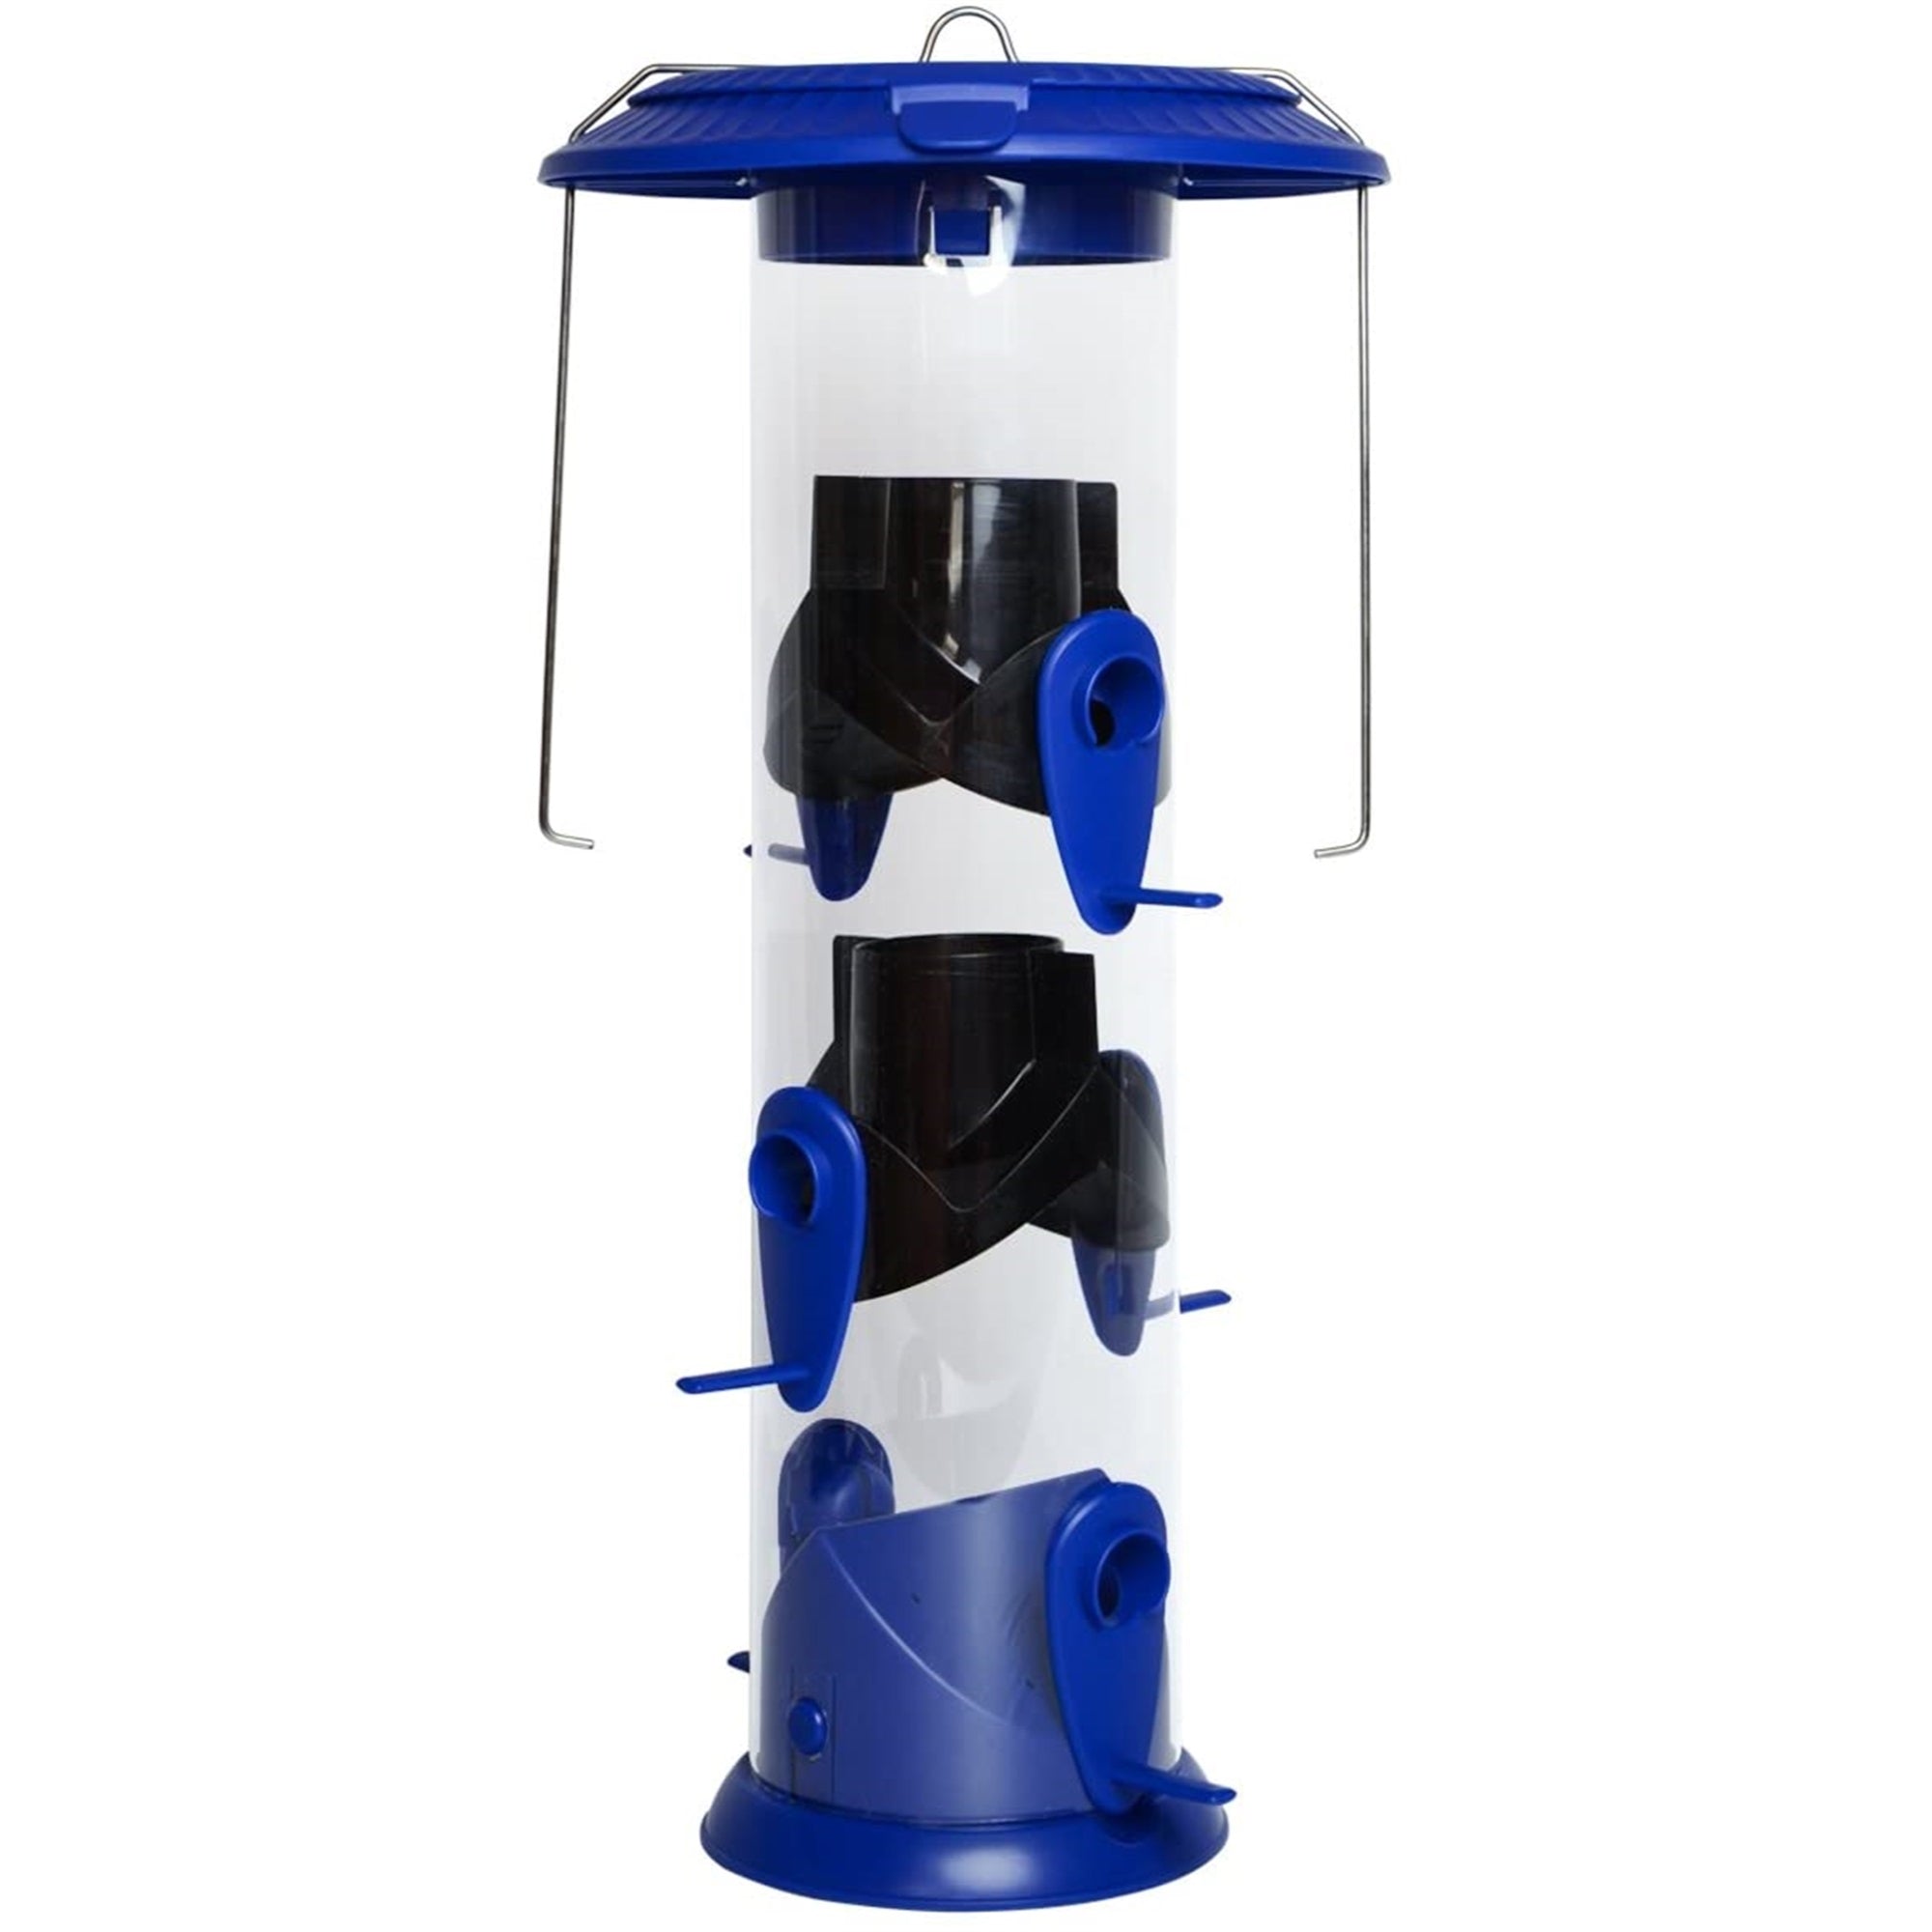 Nature's Way Bird Products WPFFB-19 Funnel Flip Top Tube Feeder, Blue, 18.5X8X8